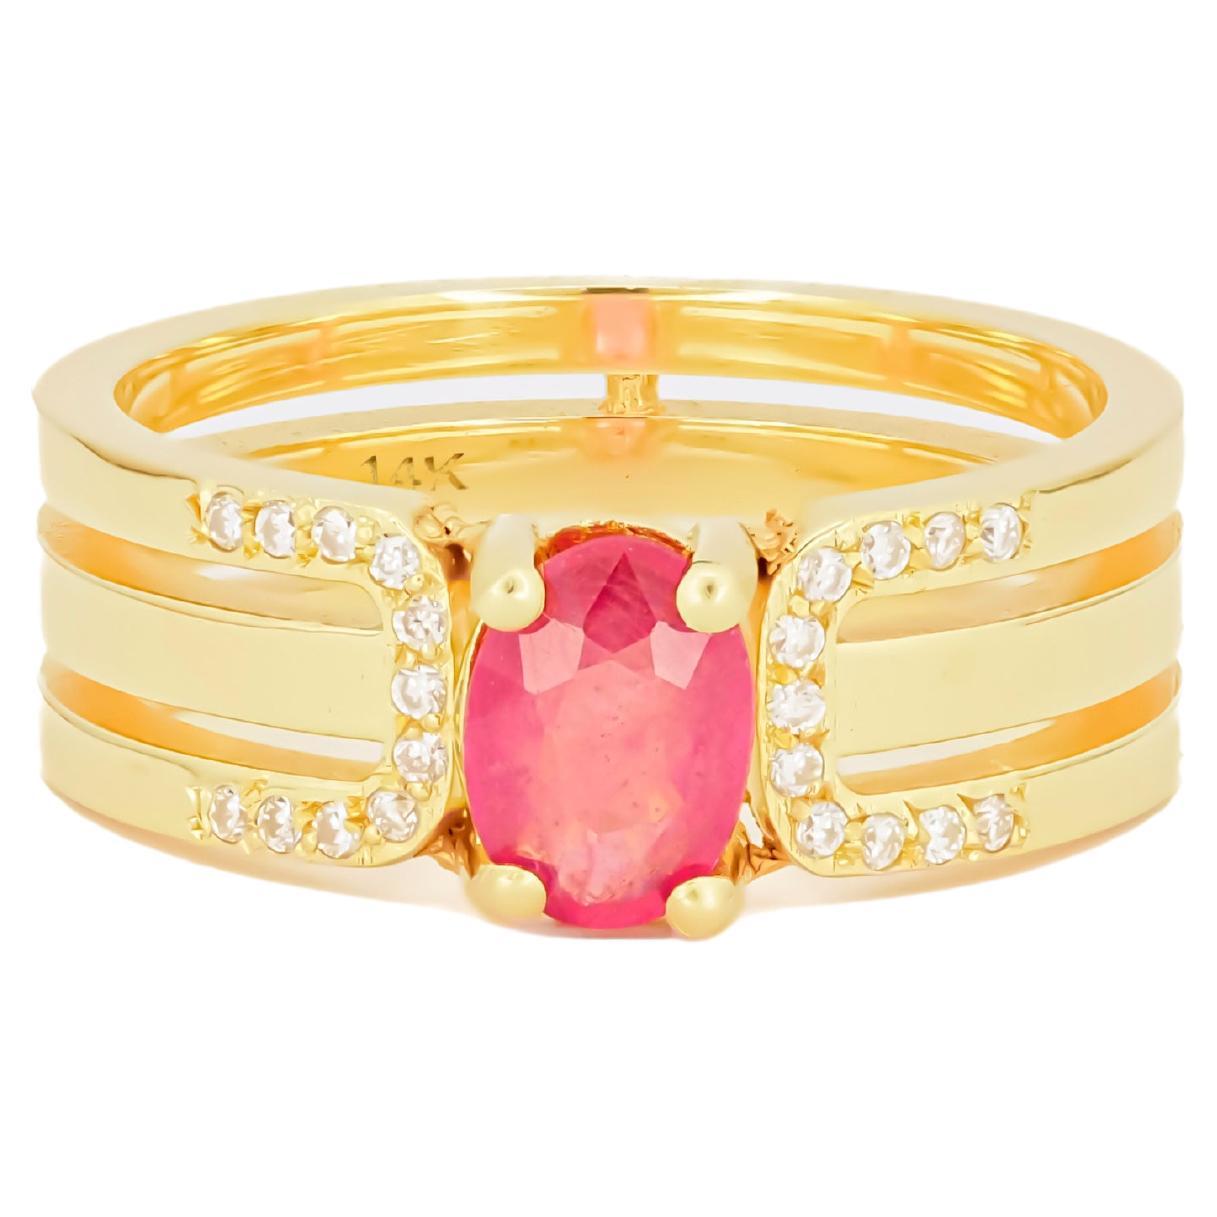 14 K Gold Mens Ring with Ruby. 